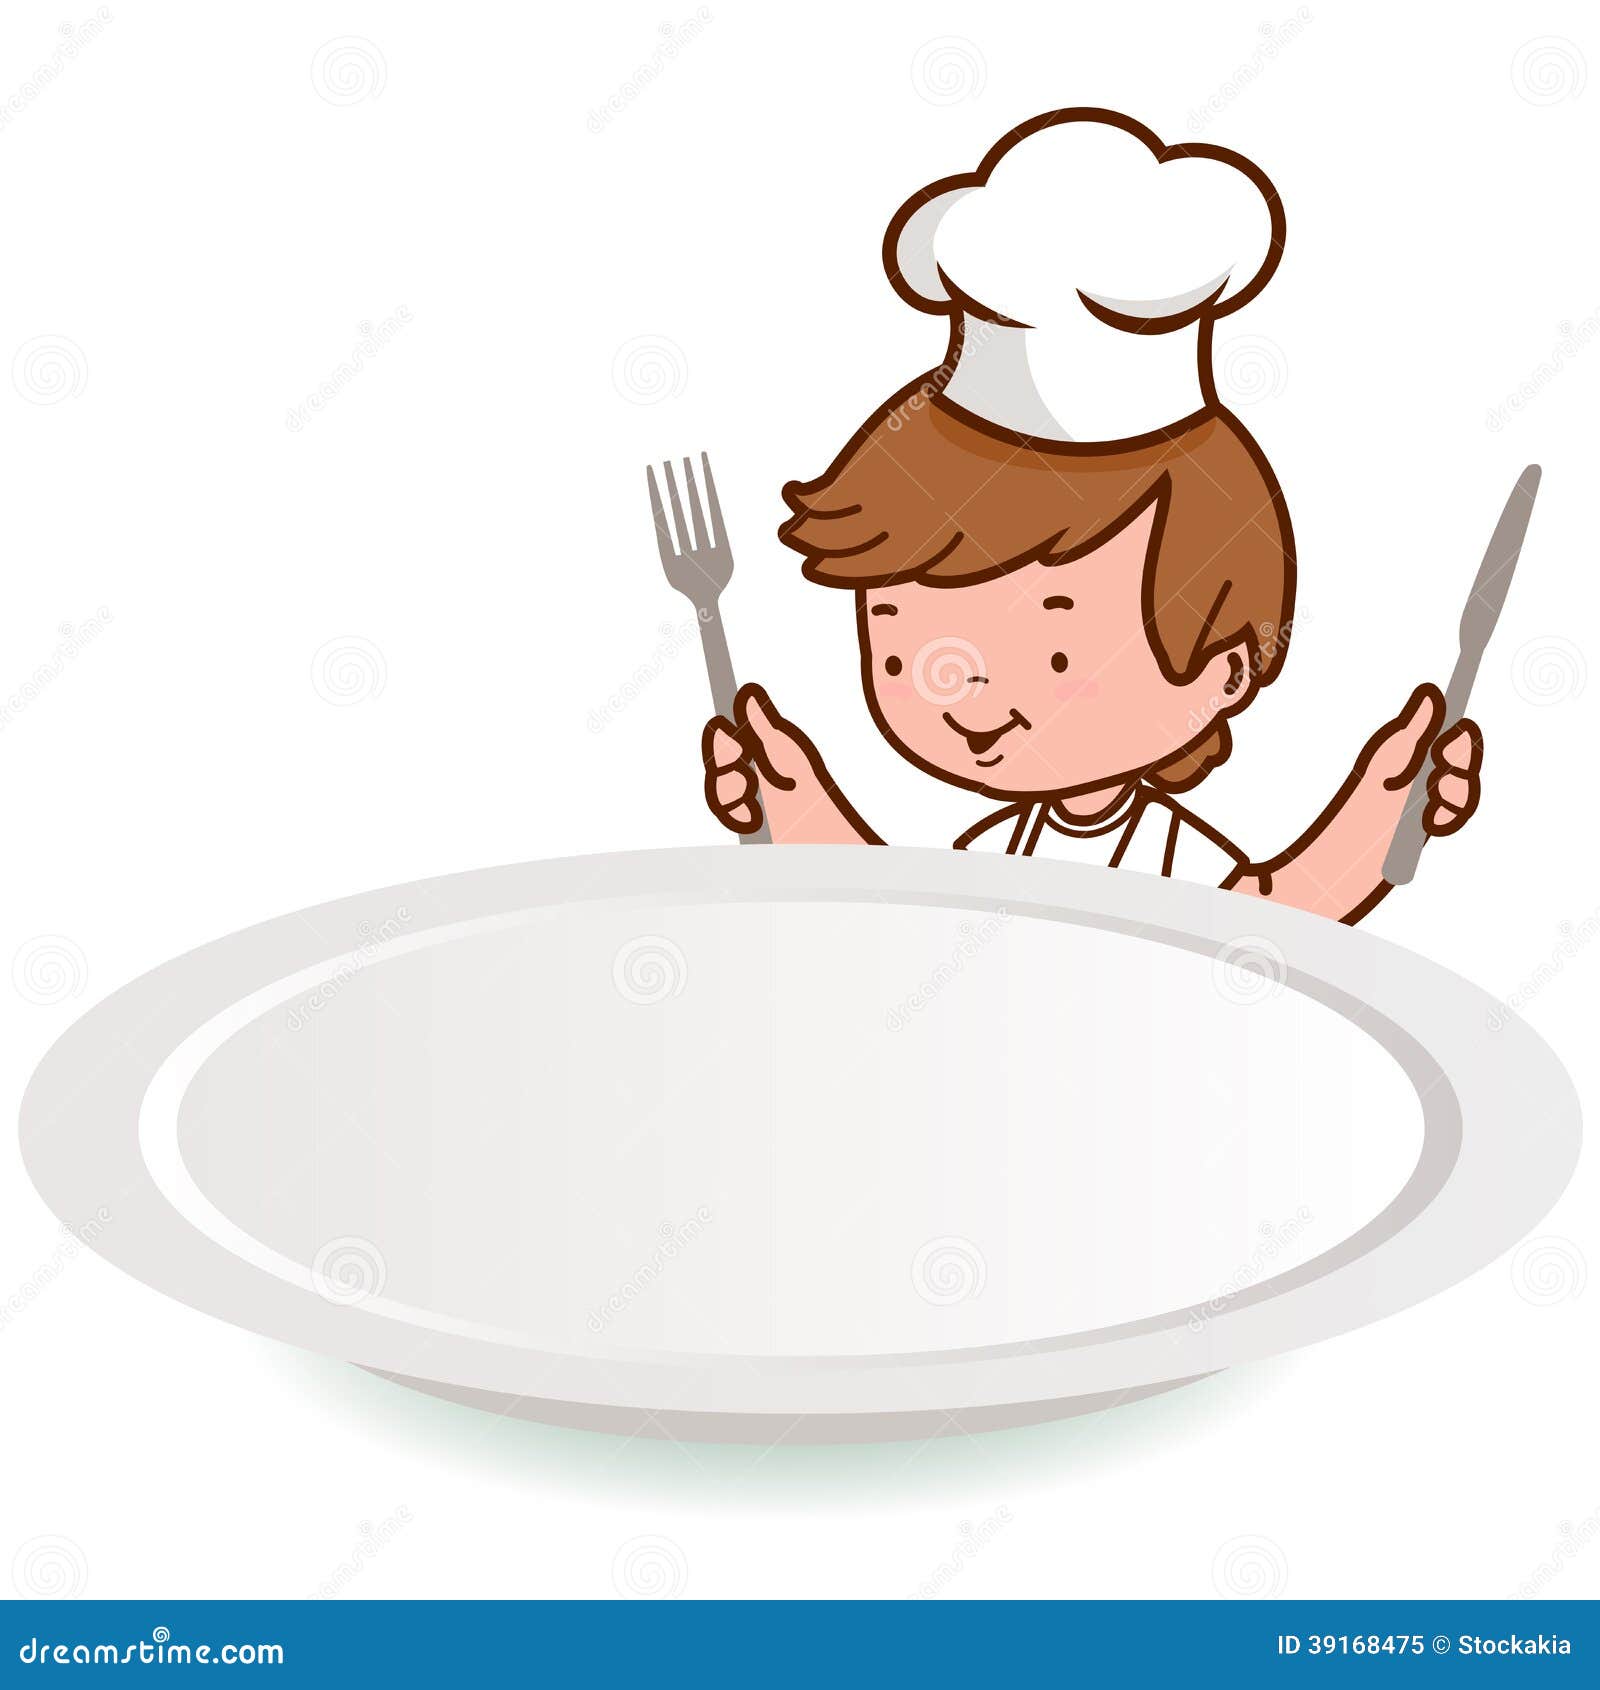 boy wearing a chef uniform, looking over at a blank dinner plate and 